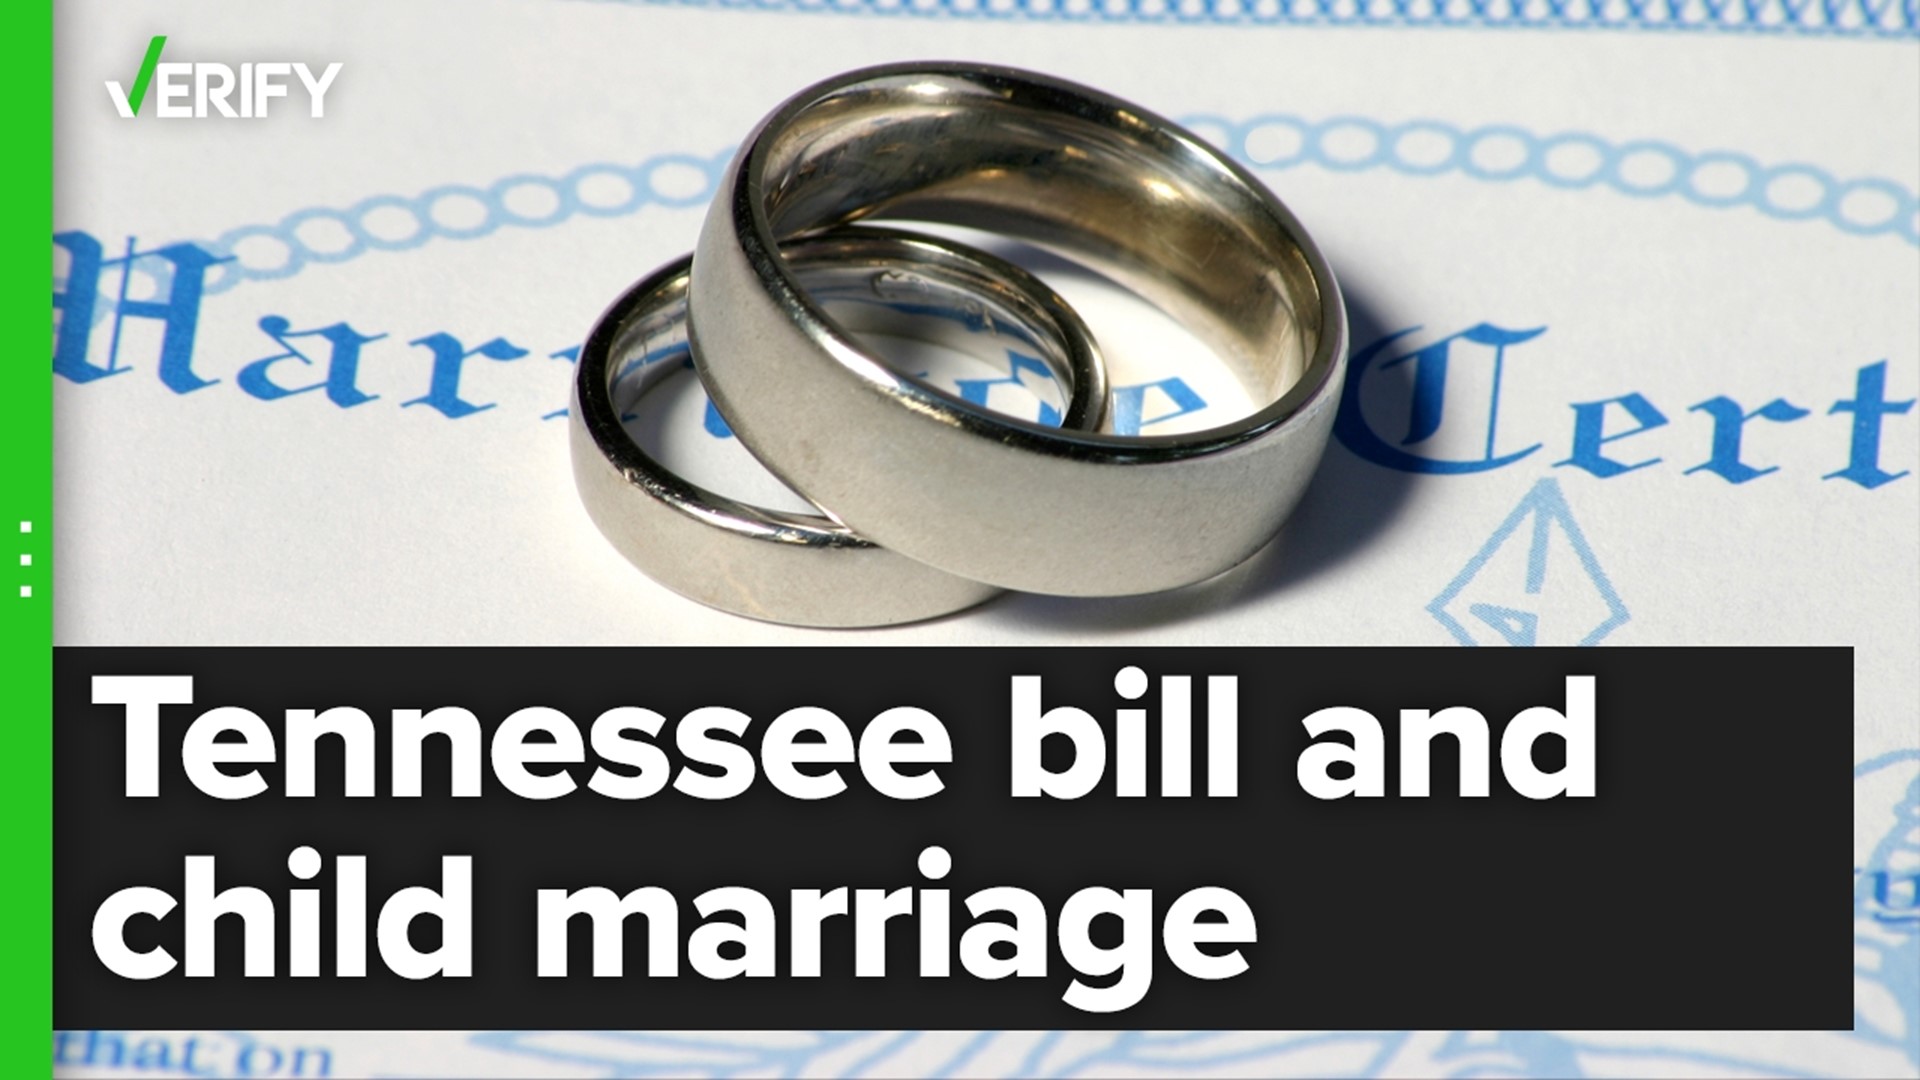 An early version of a marriage bill in Tennessee allowed children of any age to marry. That part has been amended, but other controversial sections remain.